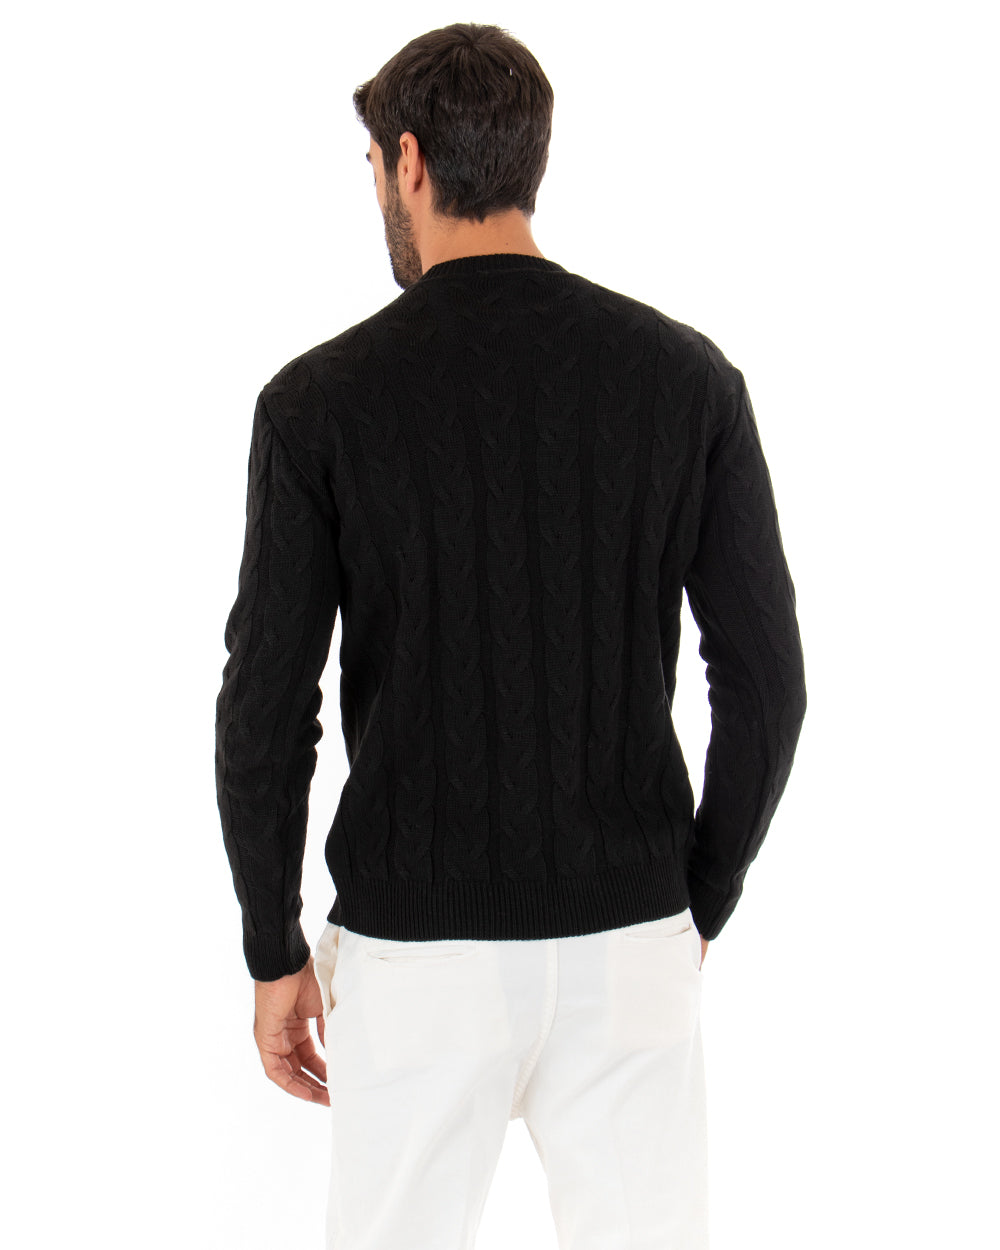 Men's Cable Pullover Sweater Solid Black Crew Neck Paul Barrell GIOSAL